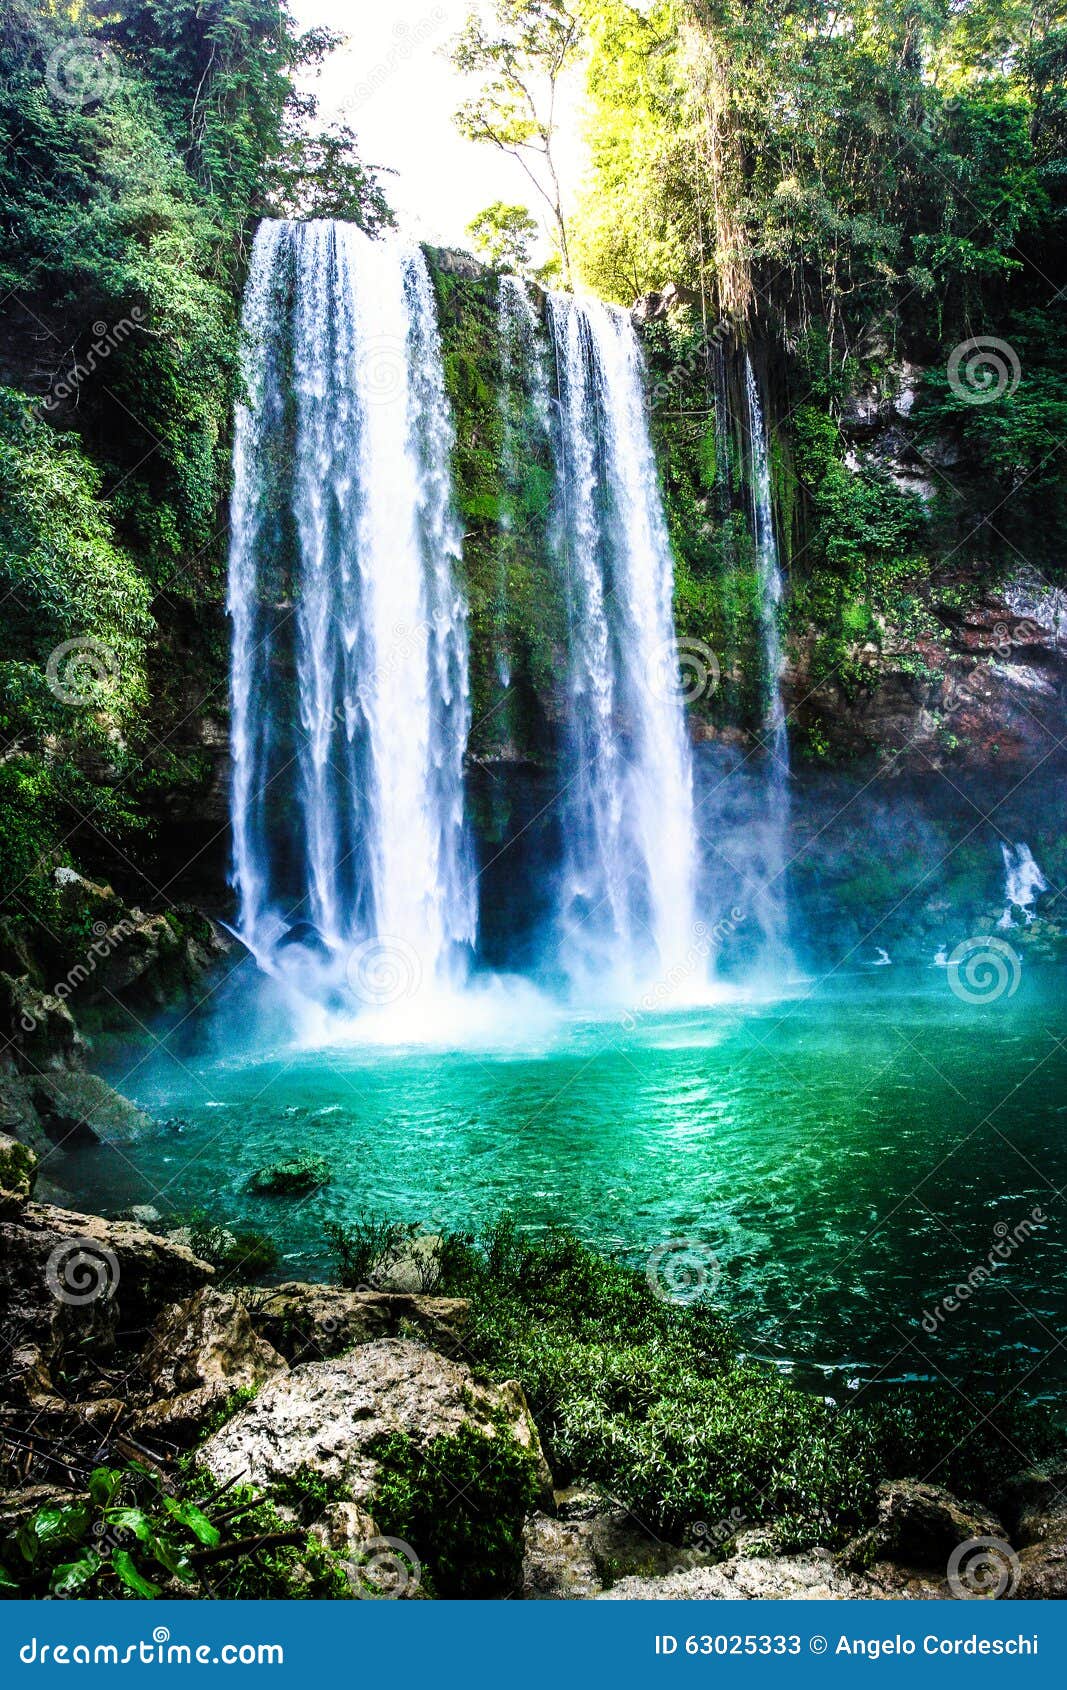 waterfall in the forest with green water lake. agua azul waterfall, mexico.